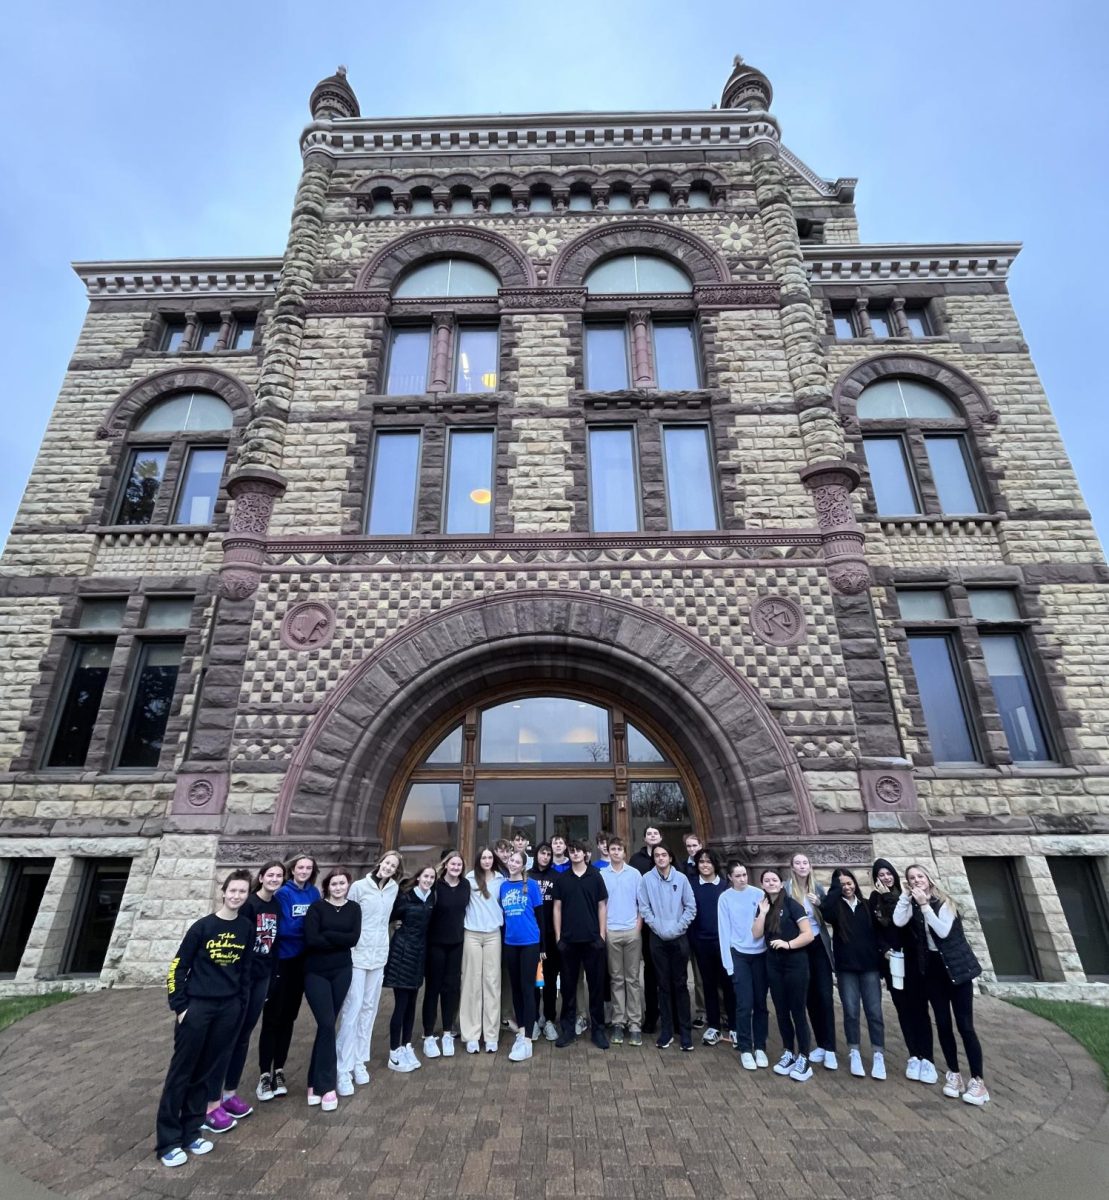 Cotter students gather outside the Winona County Courthouse prior to receiving a tour of the building as part of their Social Studies courses